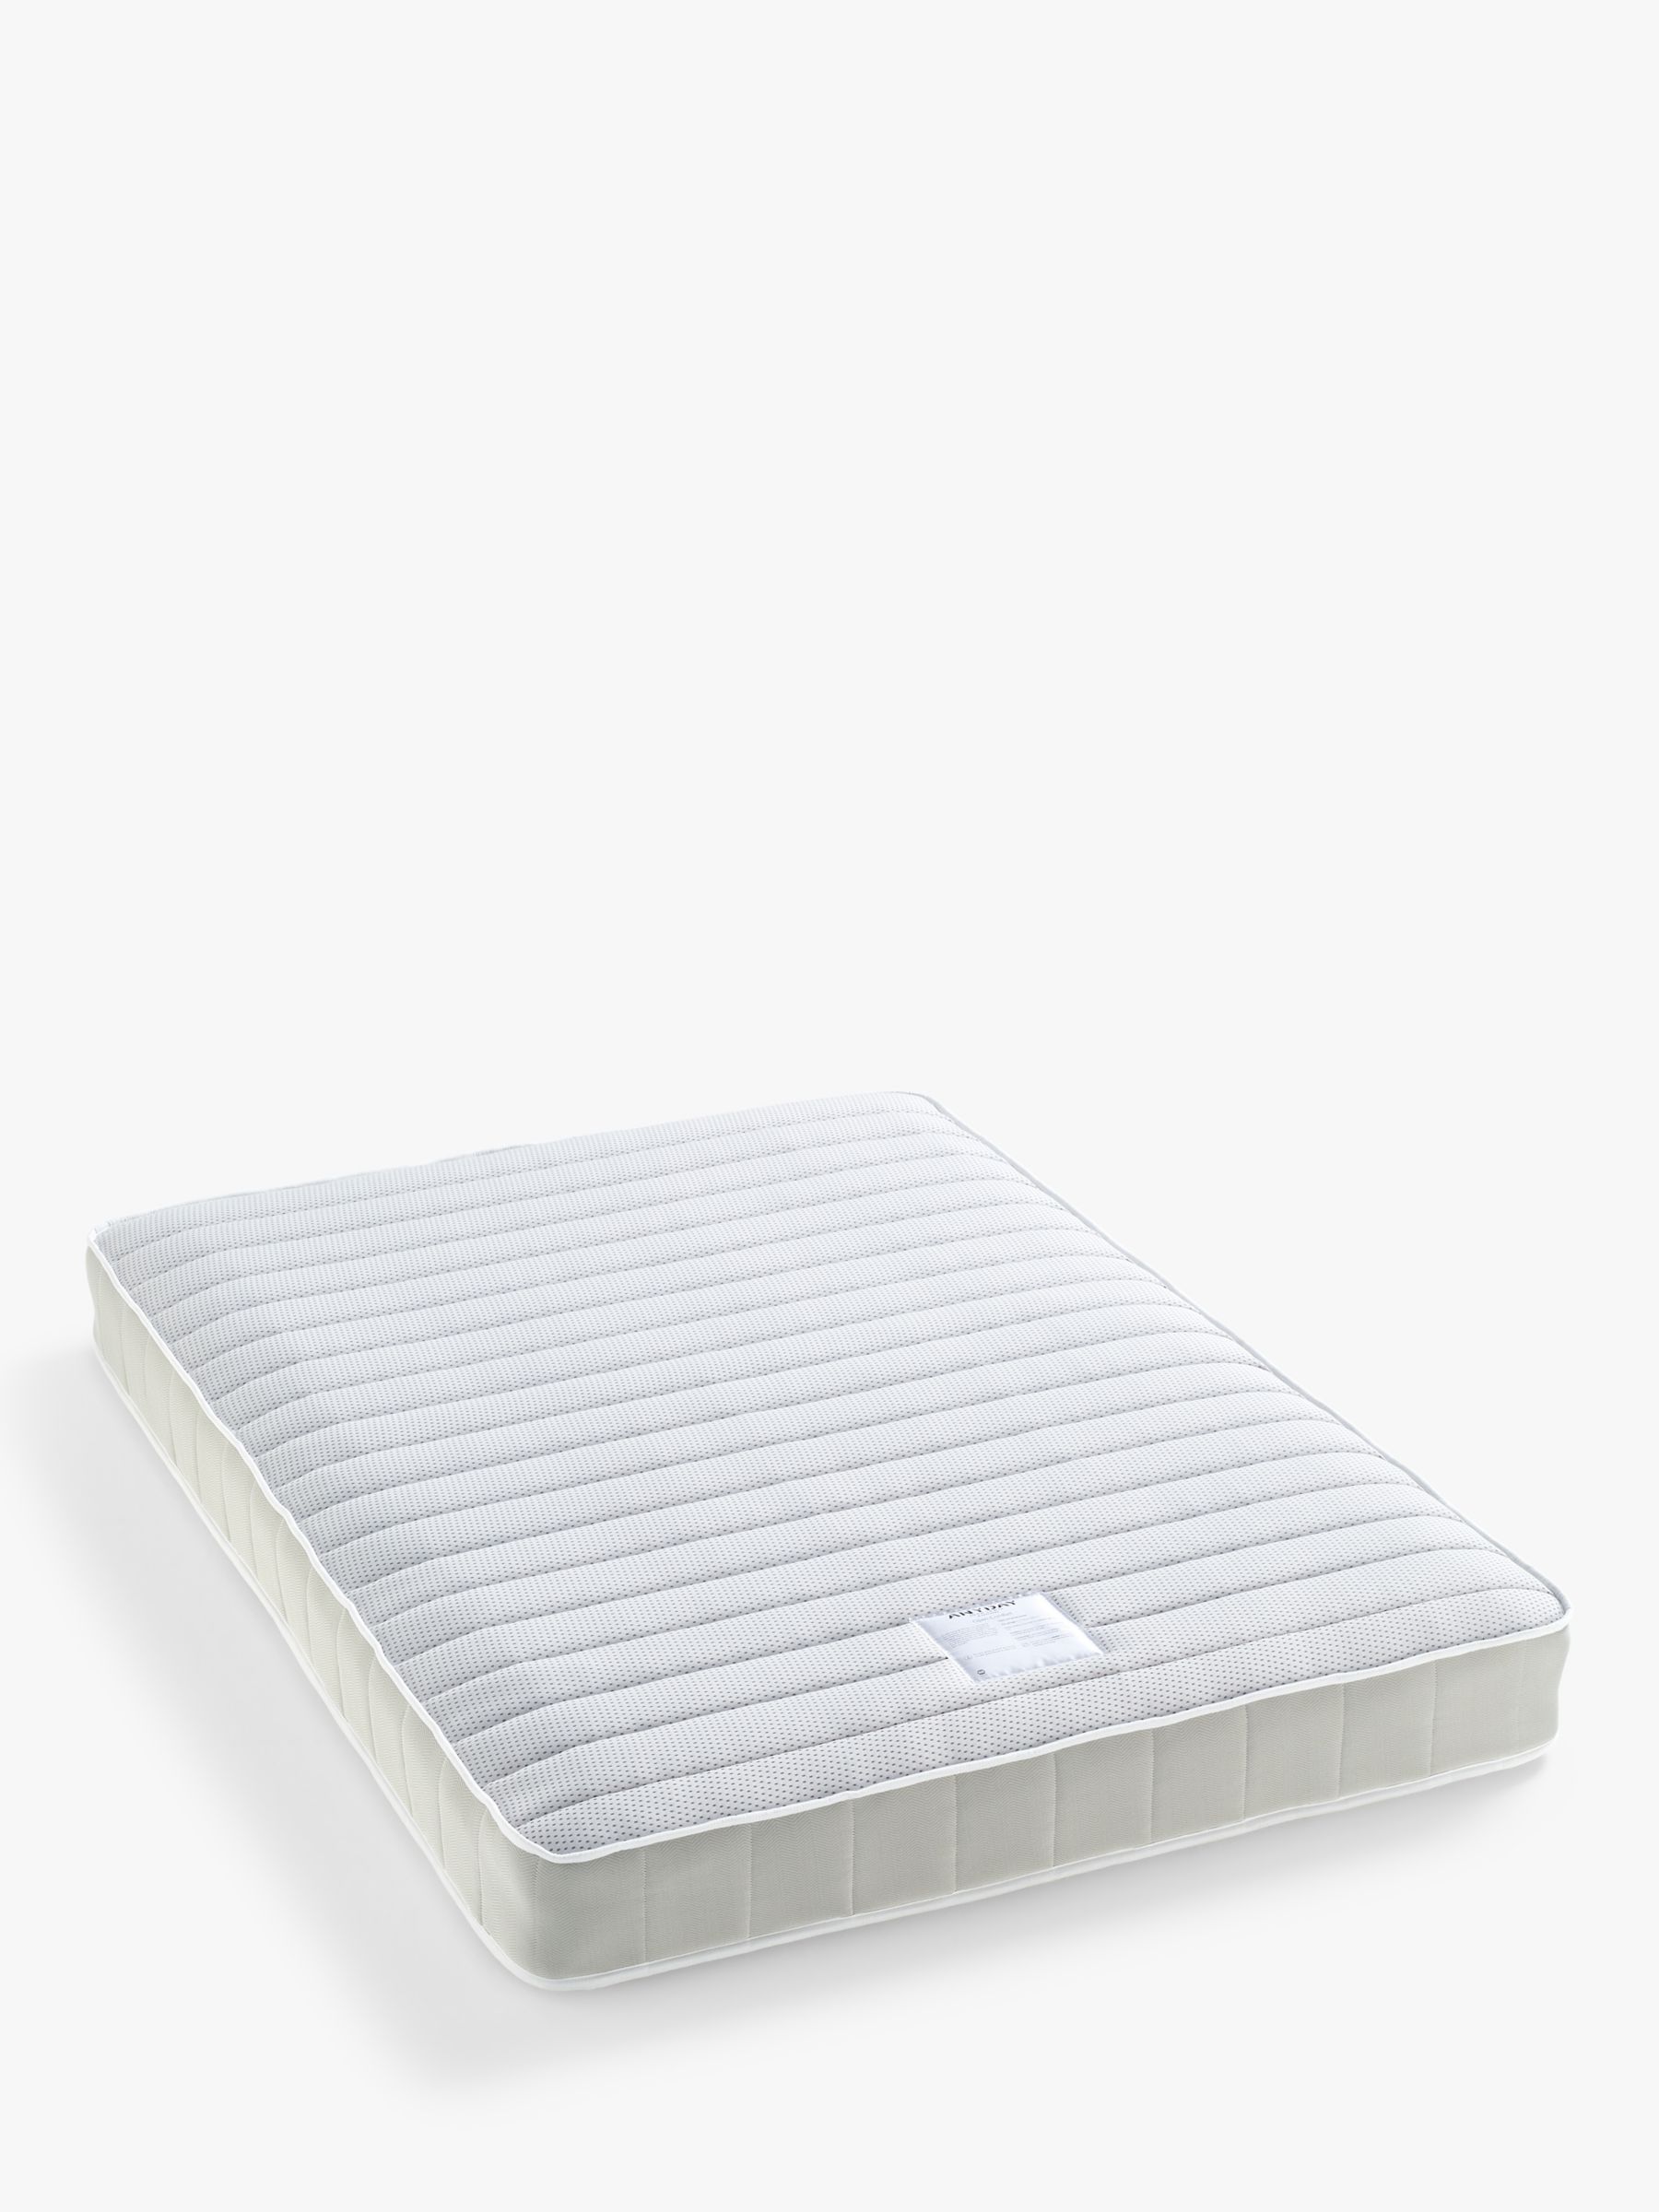 Photo of John lewis anyday open spring comfort rolled mattress medium/firm tension double